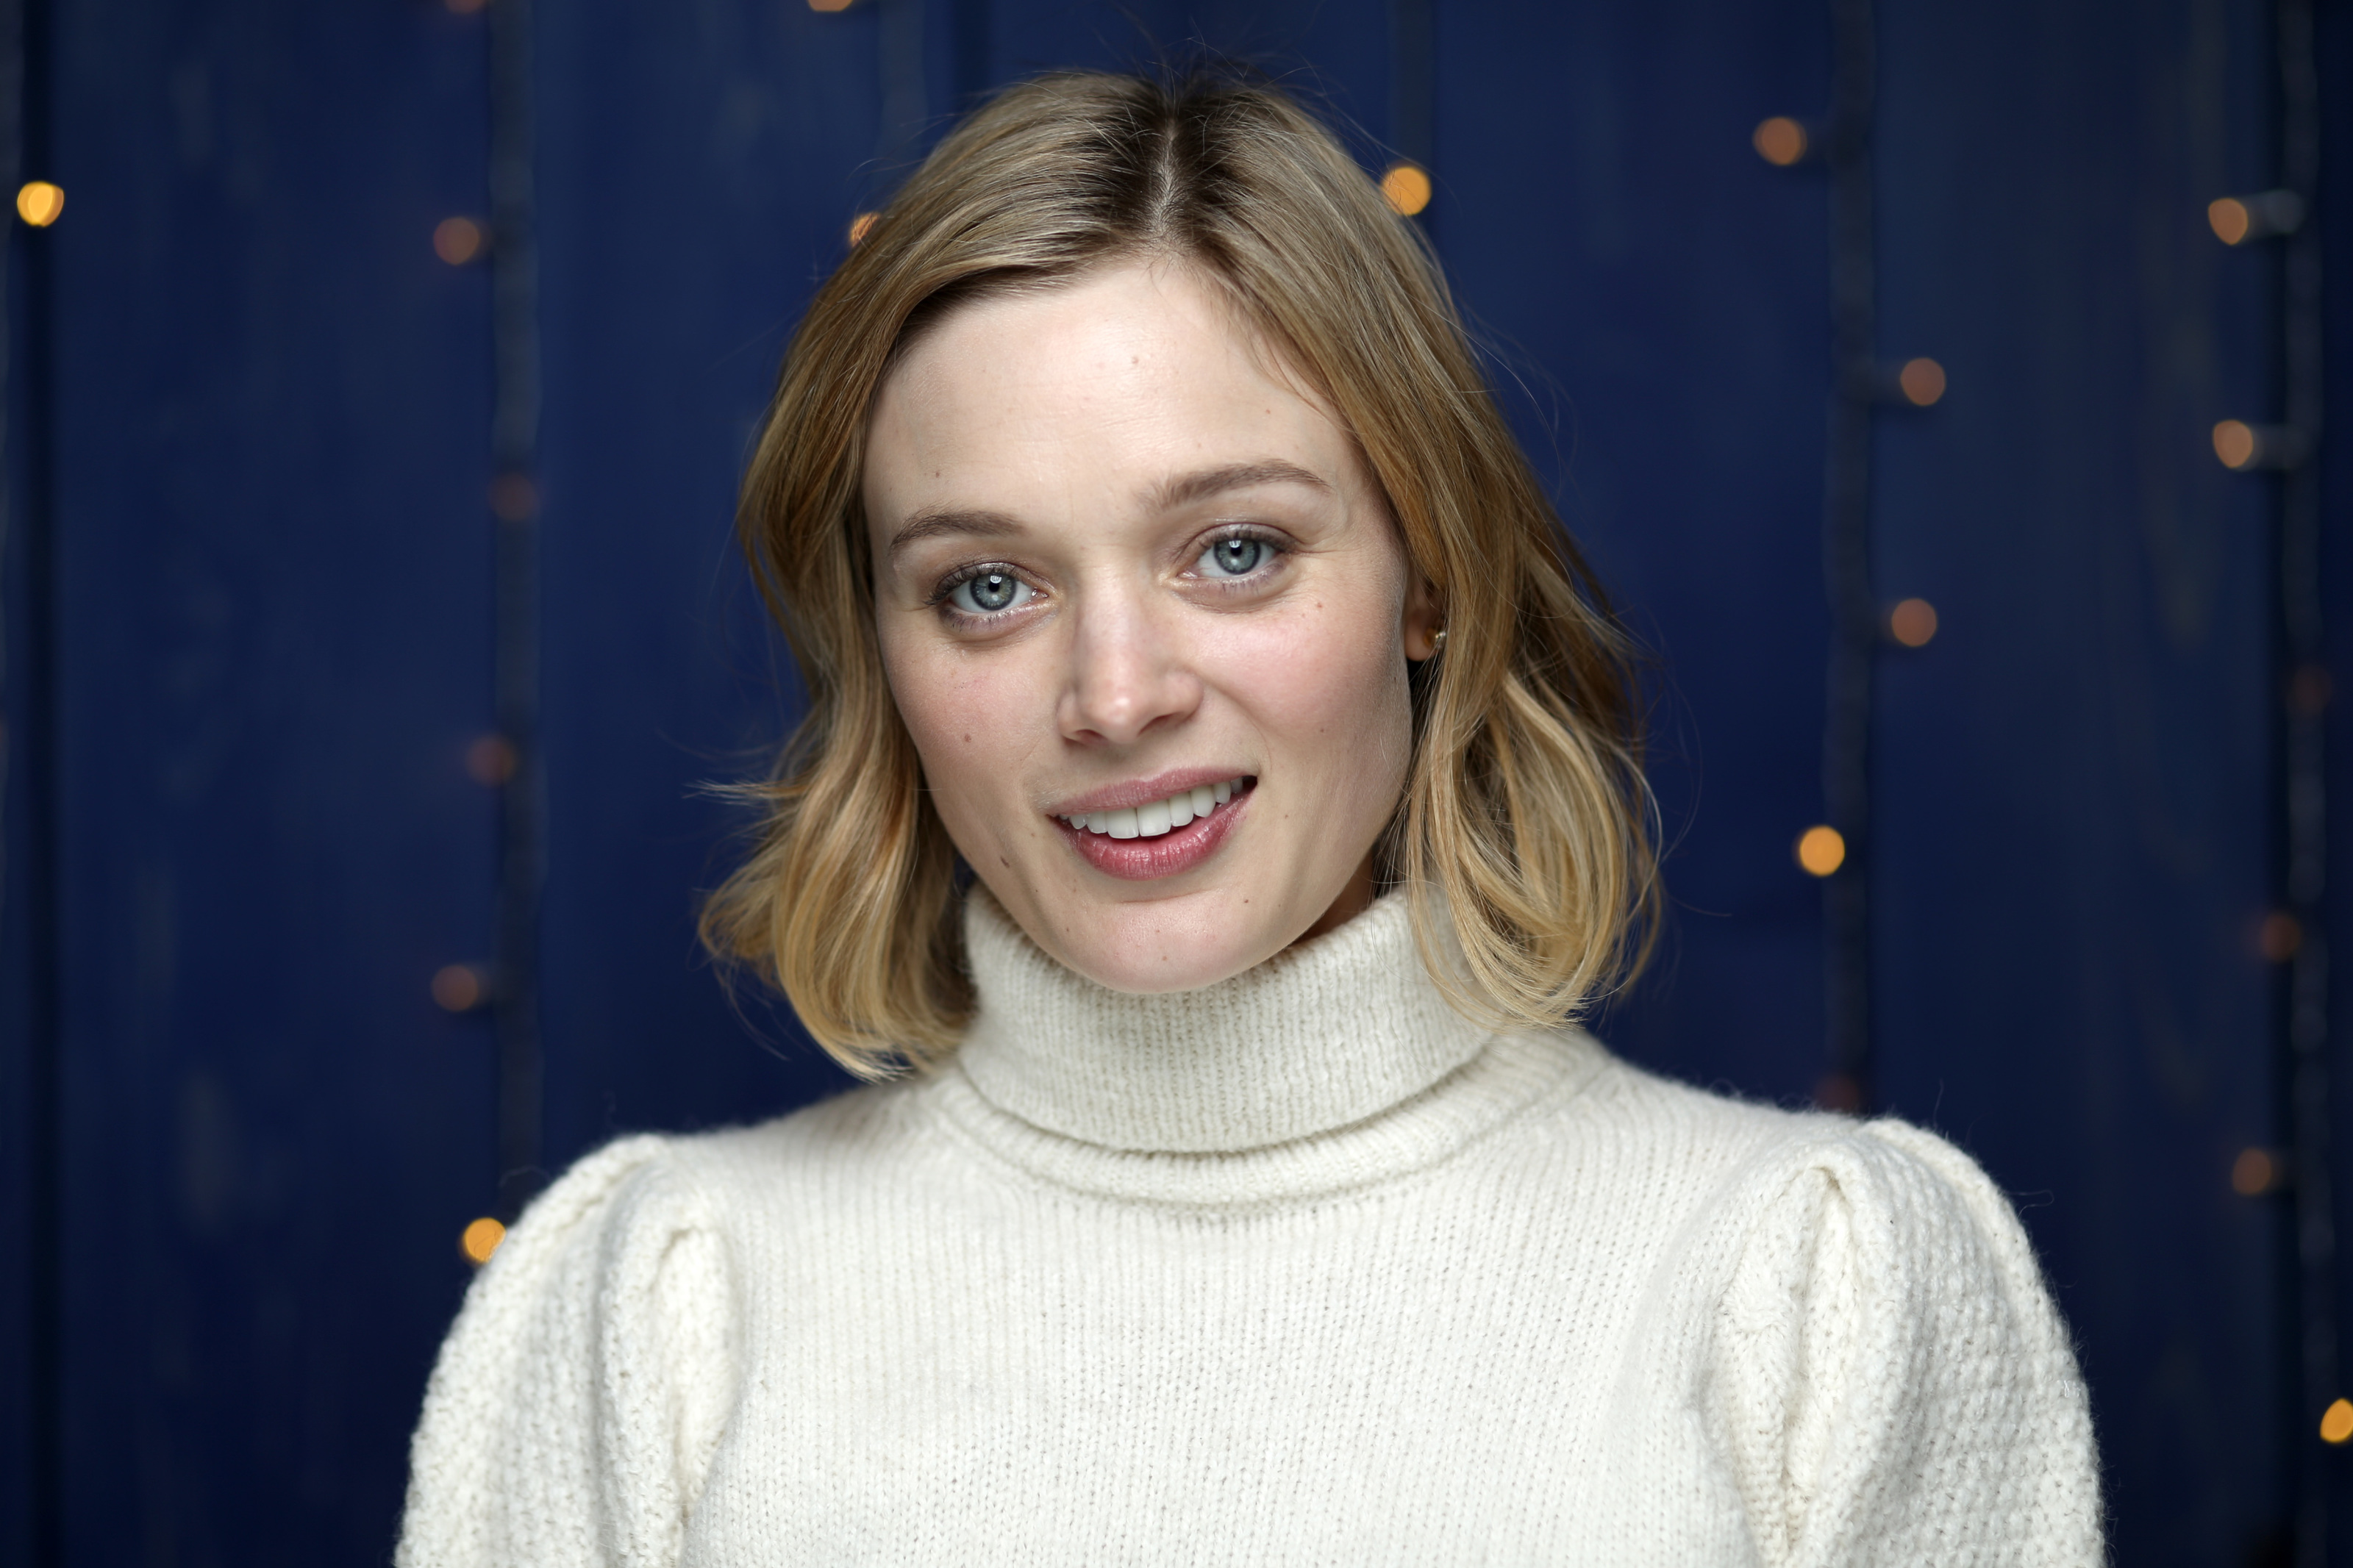 Pieces of Her: Bella Heathcote joins upcoming Netflix series